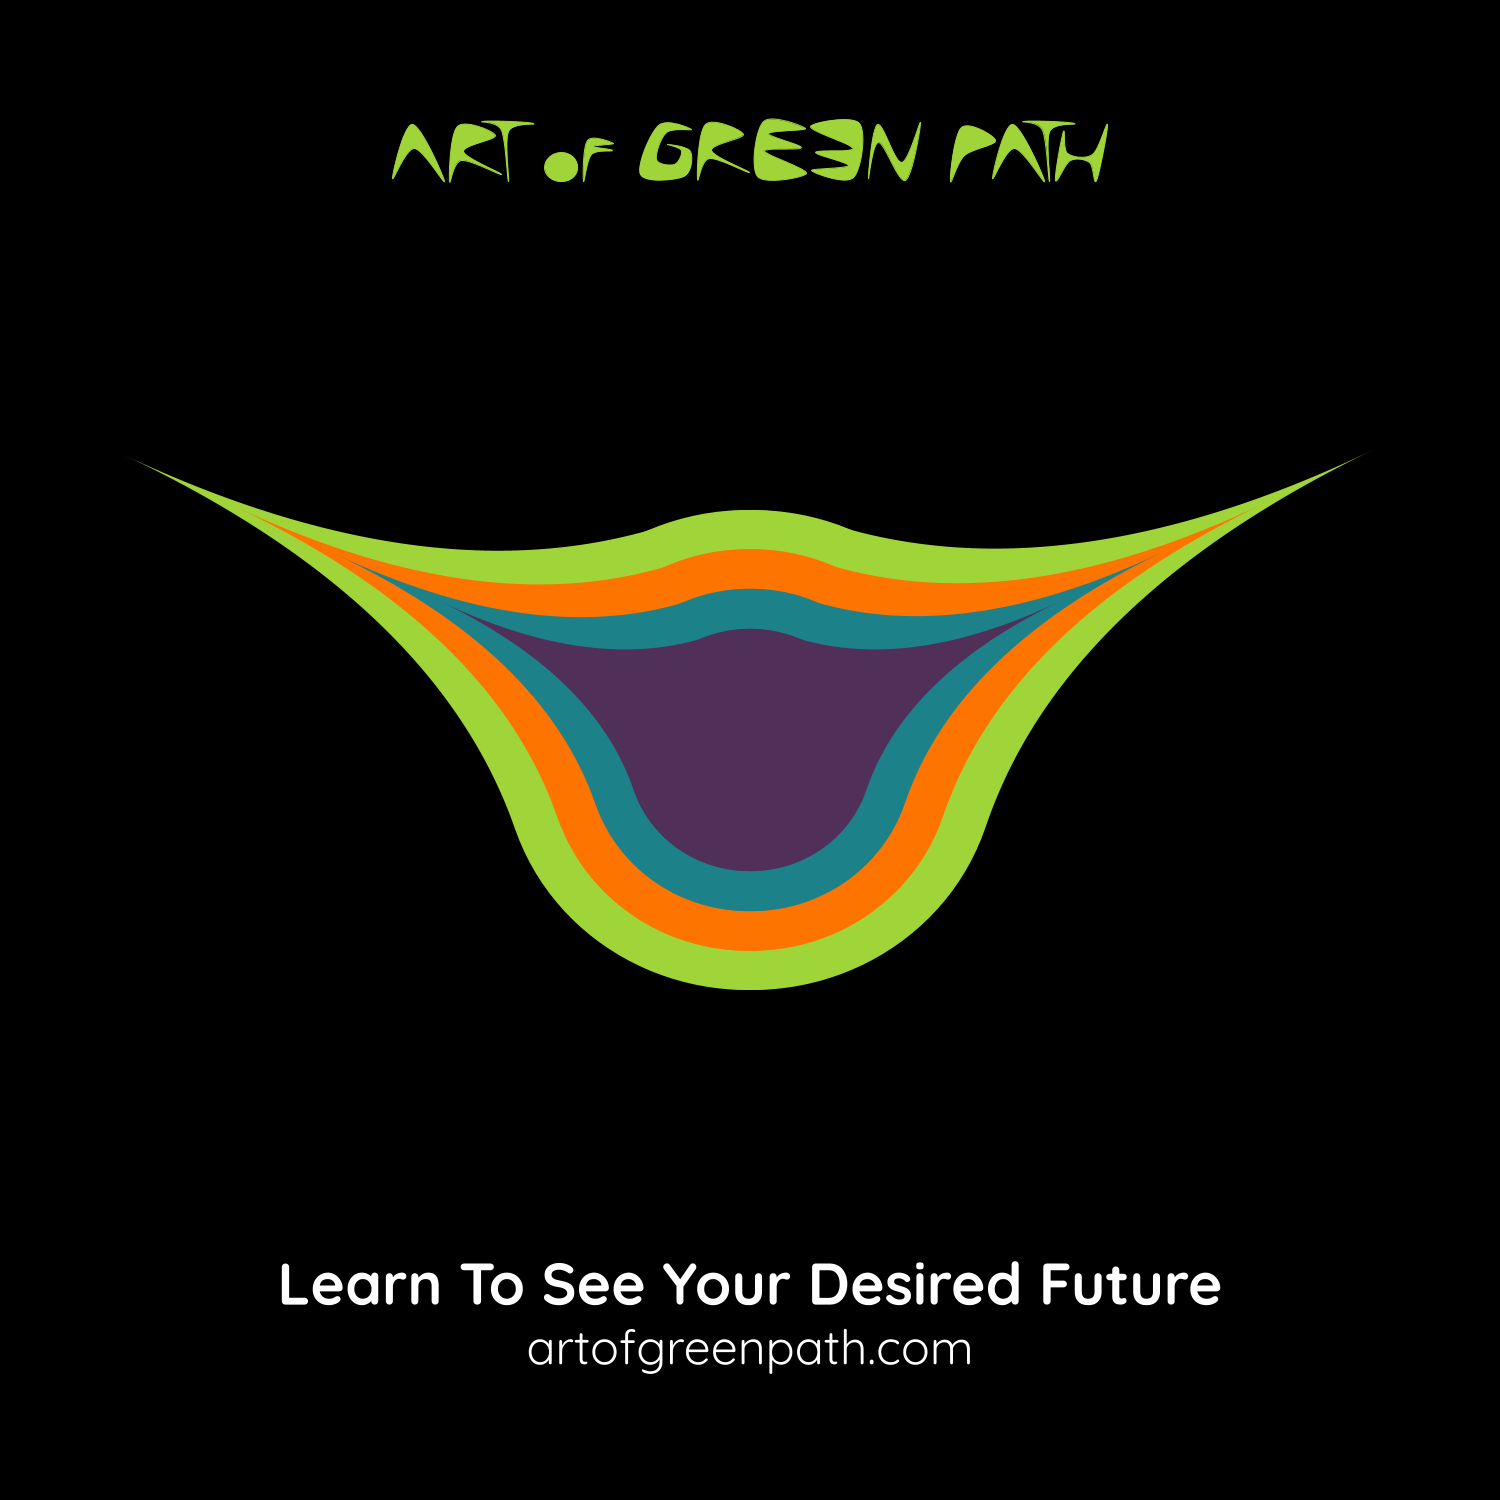 Art Of Green Path - Learn To See Your Desired Future